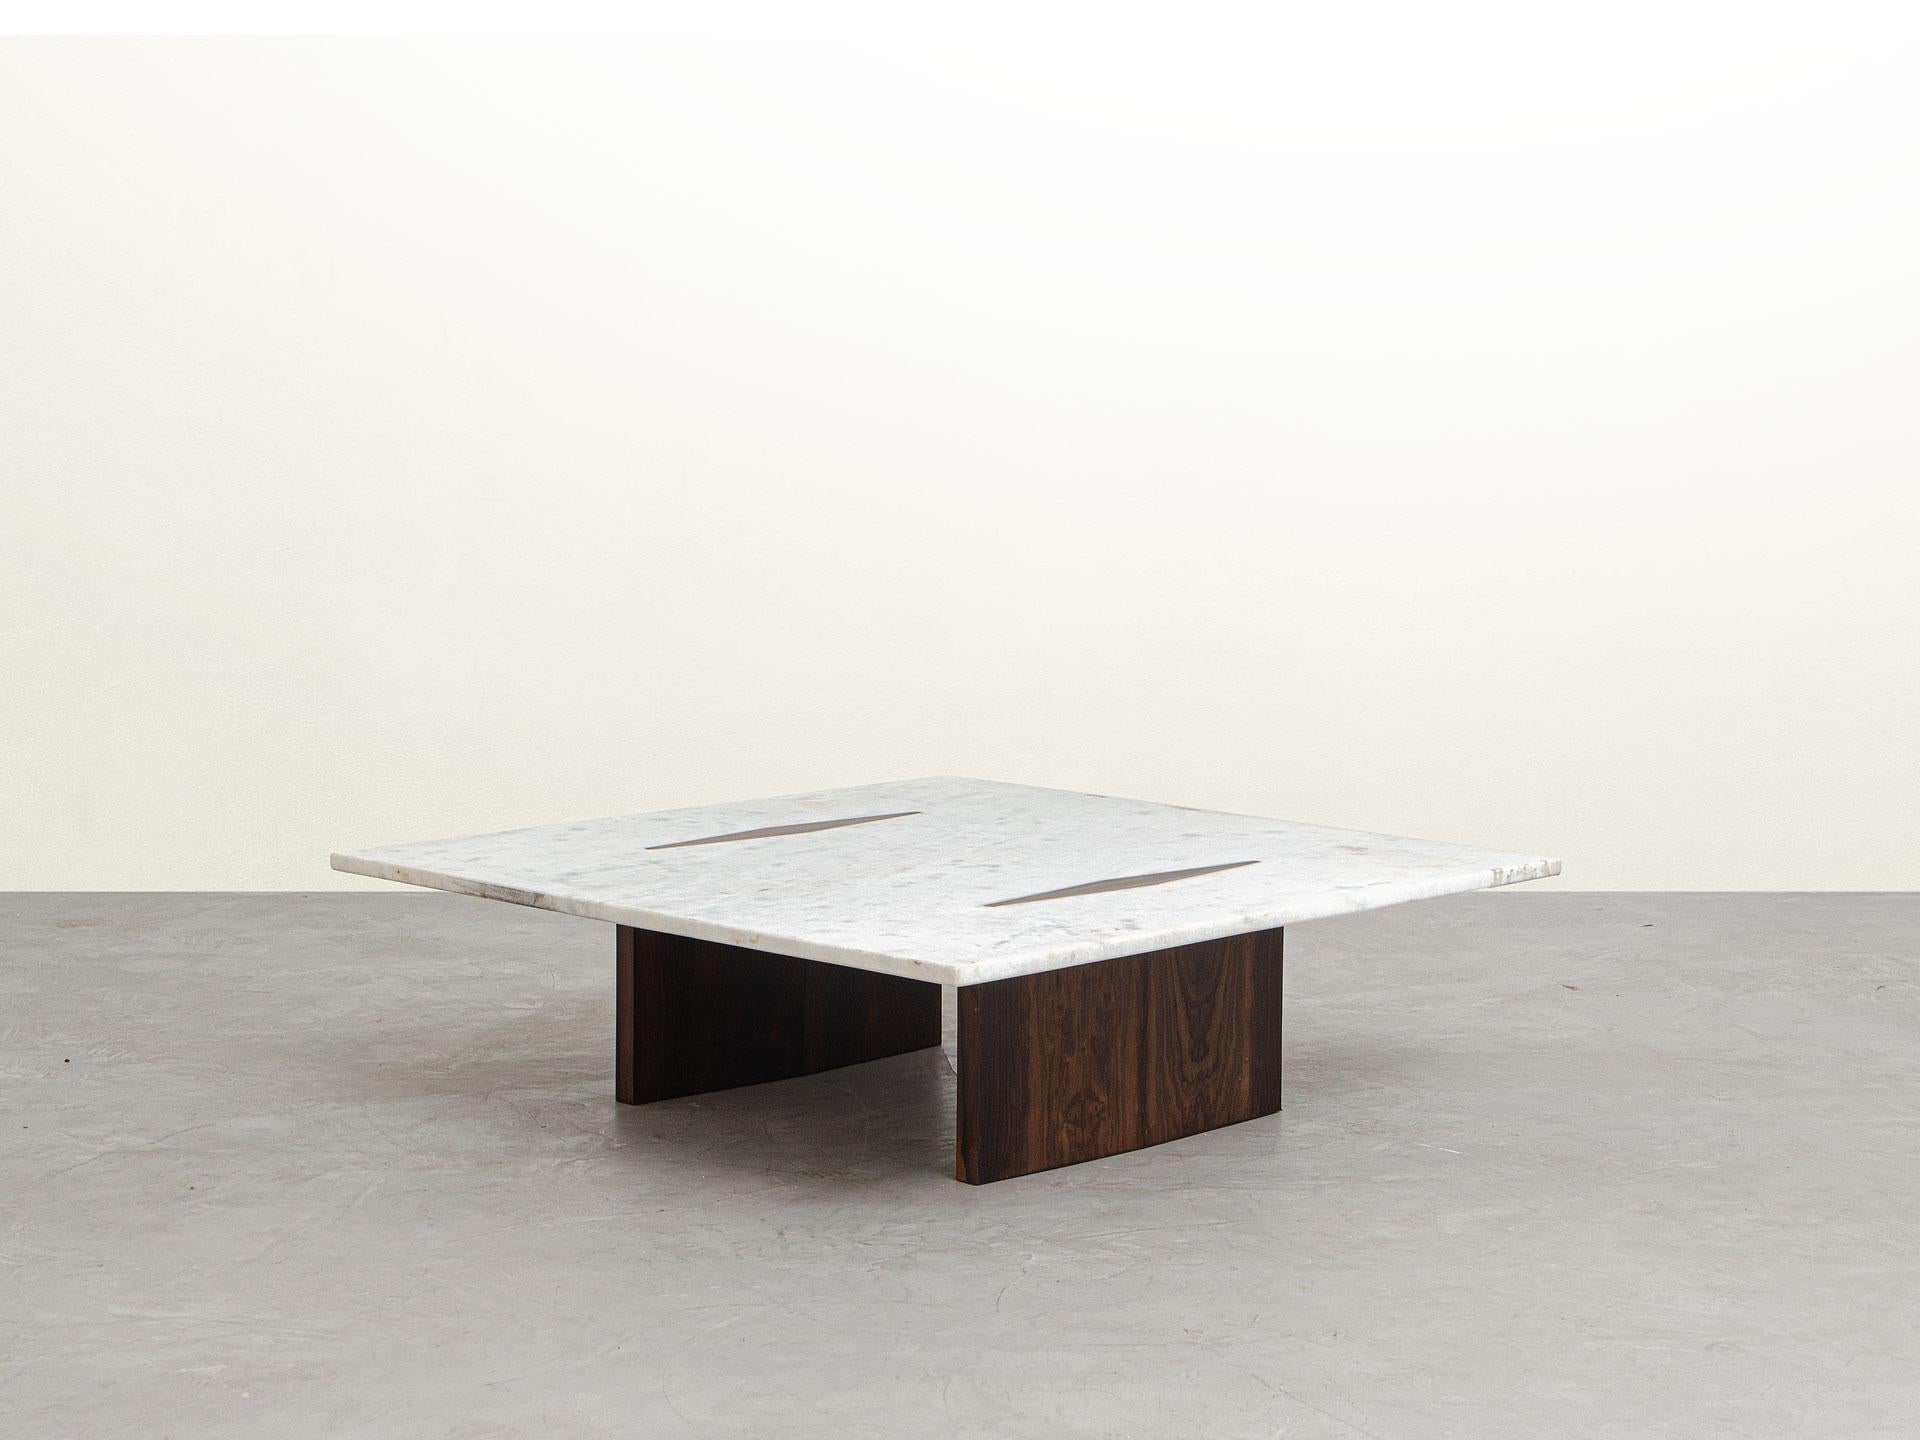 This rare coffee table was designed by Jorge Zalszupin during the Brazilian midcentury, in the 60s. The 